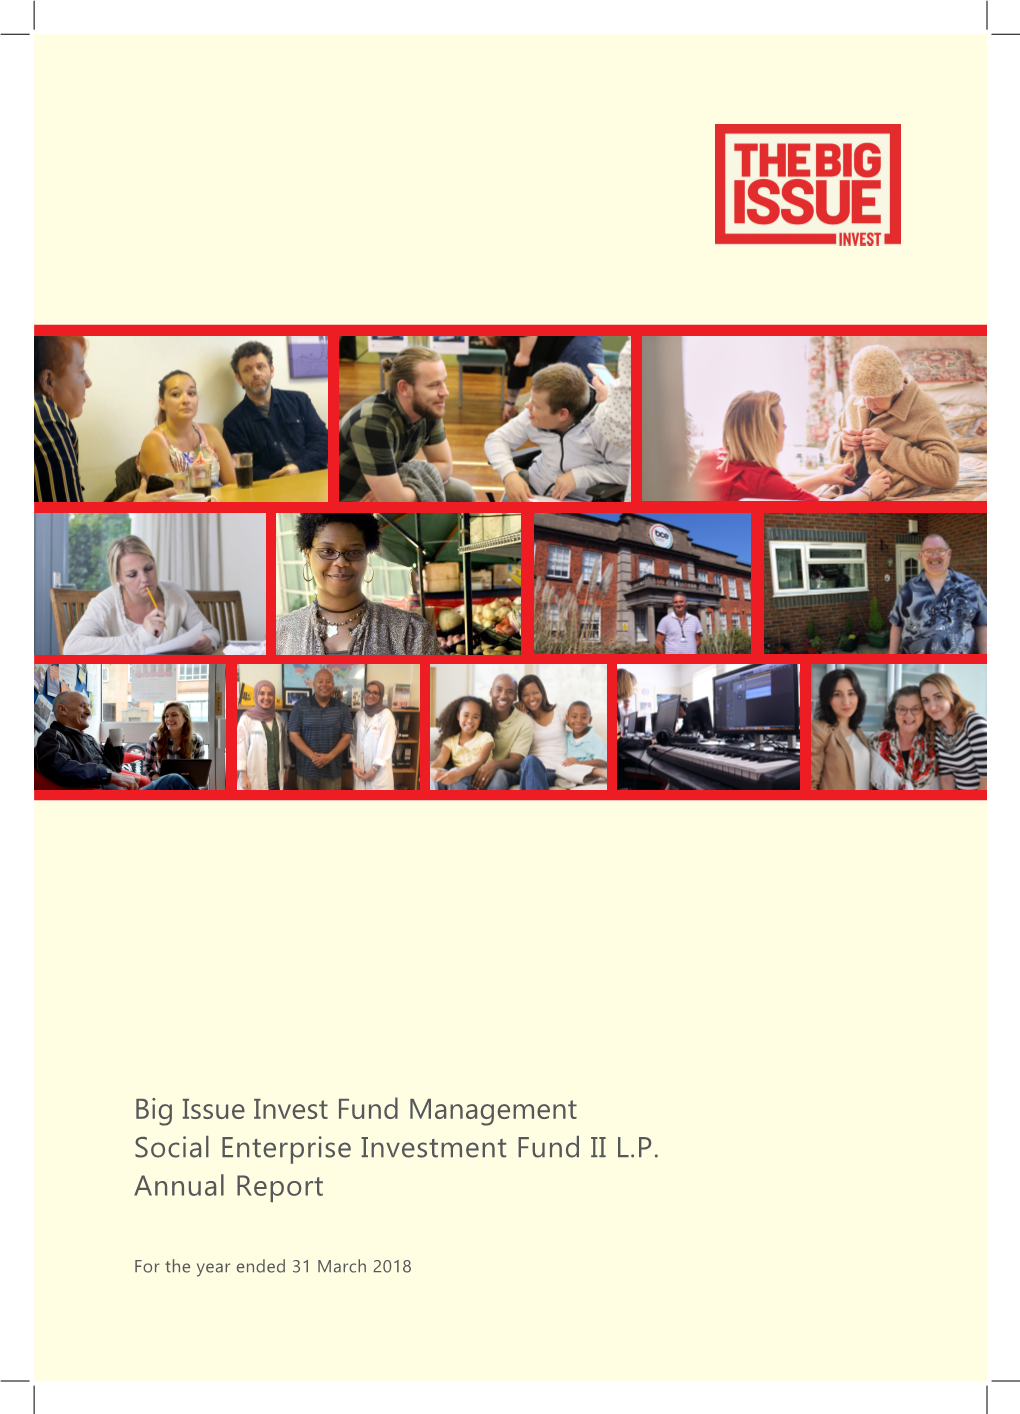 Big Issue Invest Fund Management Social Enterprise Investment Fund II L.P. Annual Report